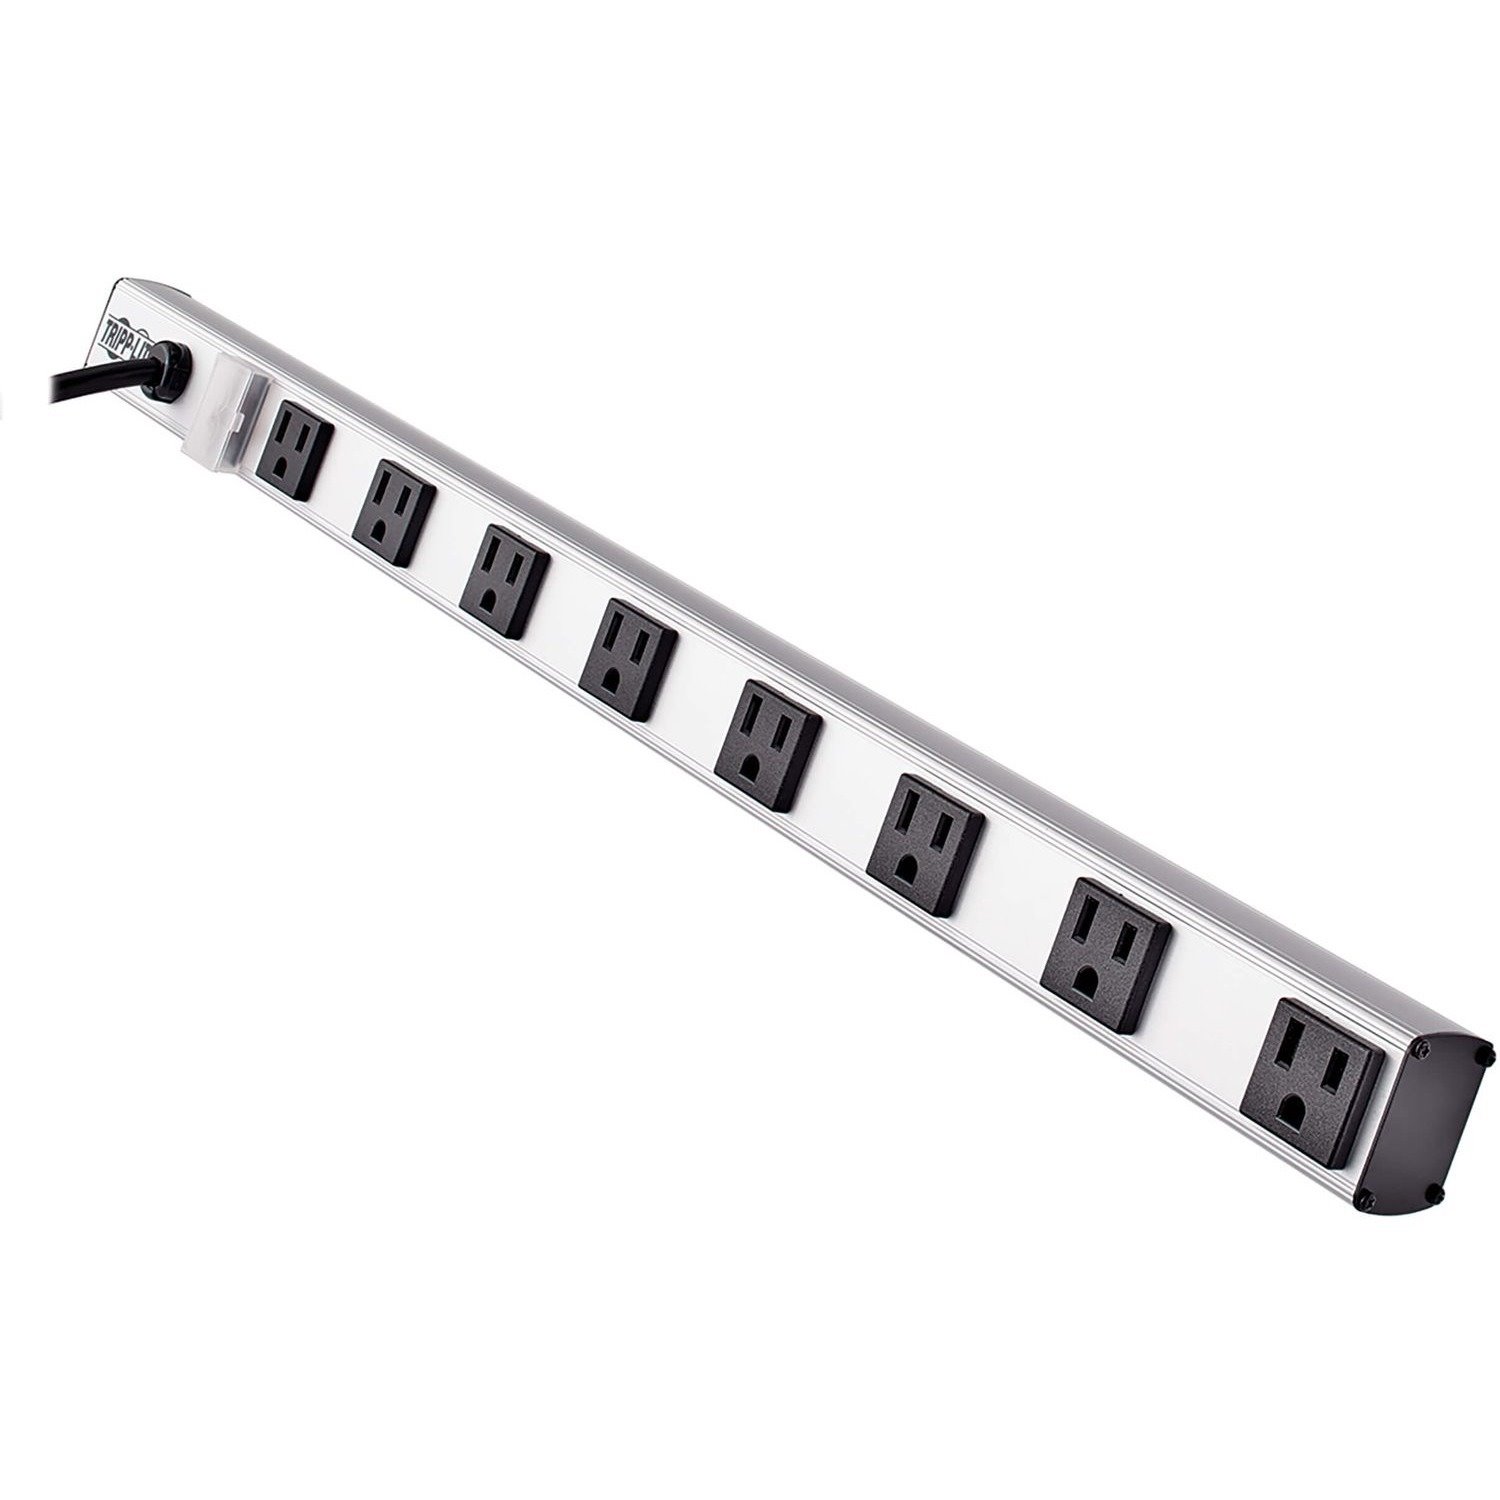 Tripp Lite by Eaton 8 Right-Angle Outlet Vertical Power Strip, 120V, 15A, 15 ft. (4.57 m) Cord, 5-15P, 24 in.